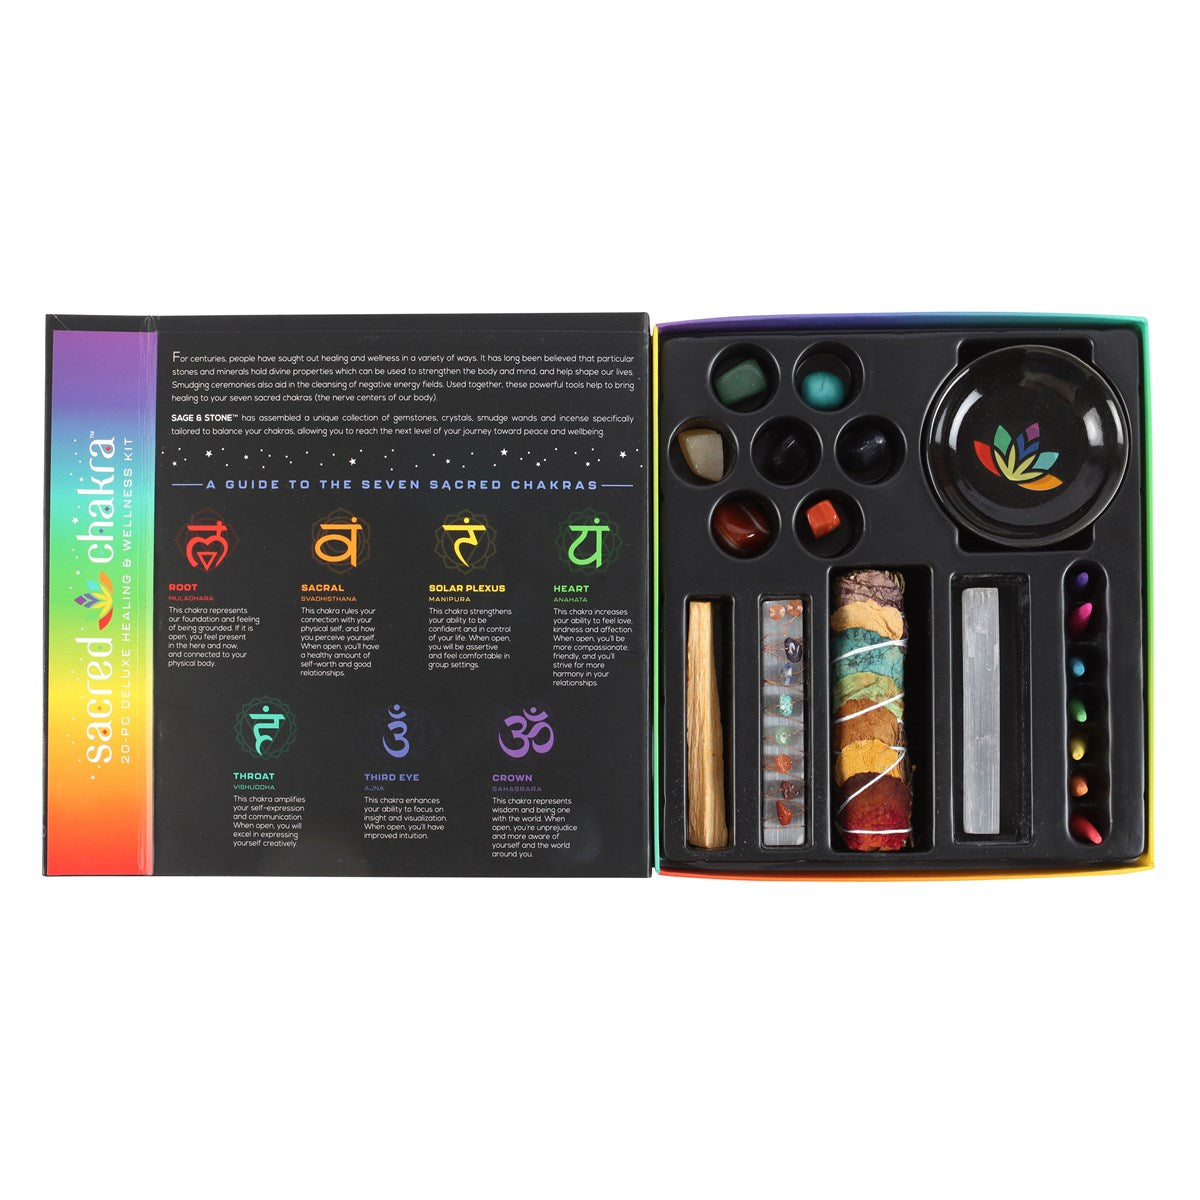 SACRED CHAKRA DELUXE HEALING AND WELLNESS KIT